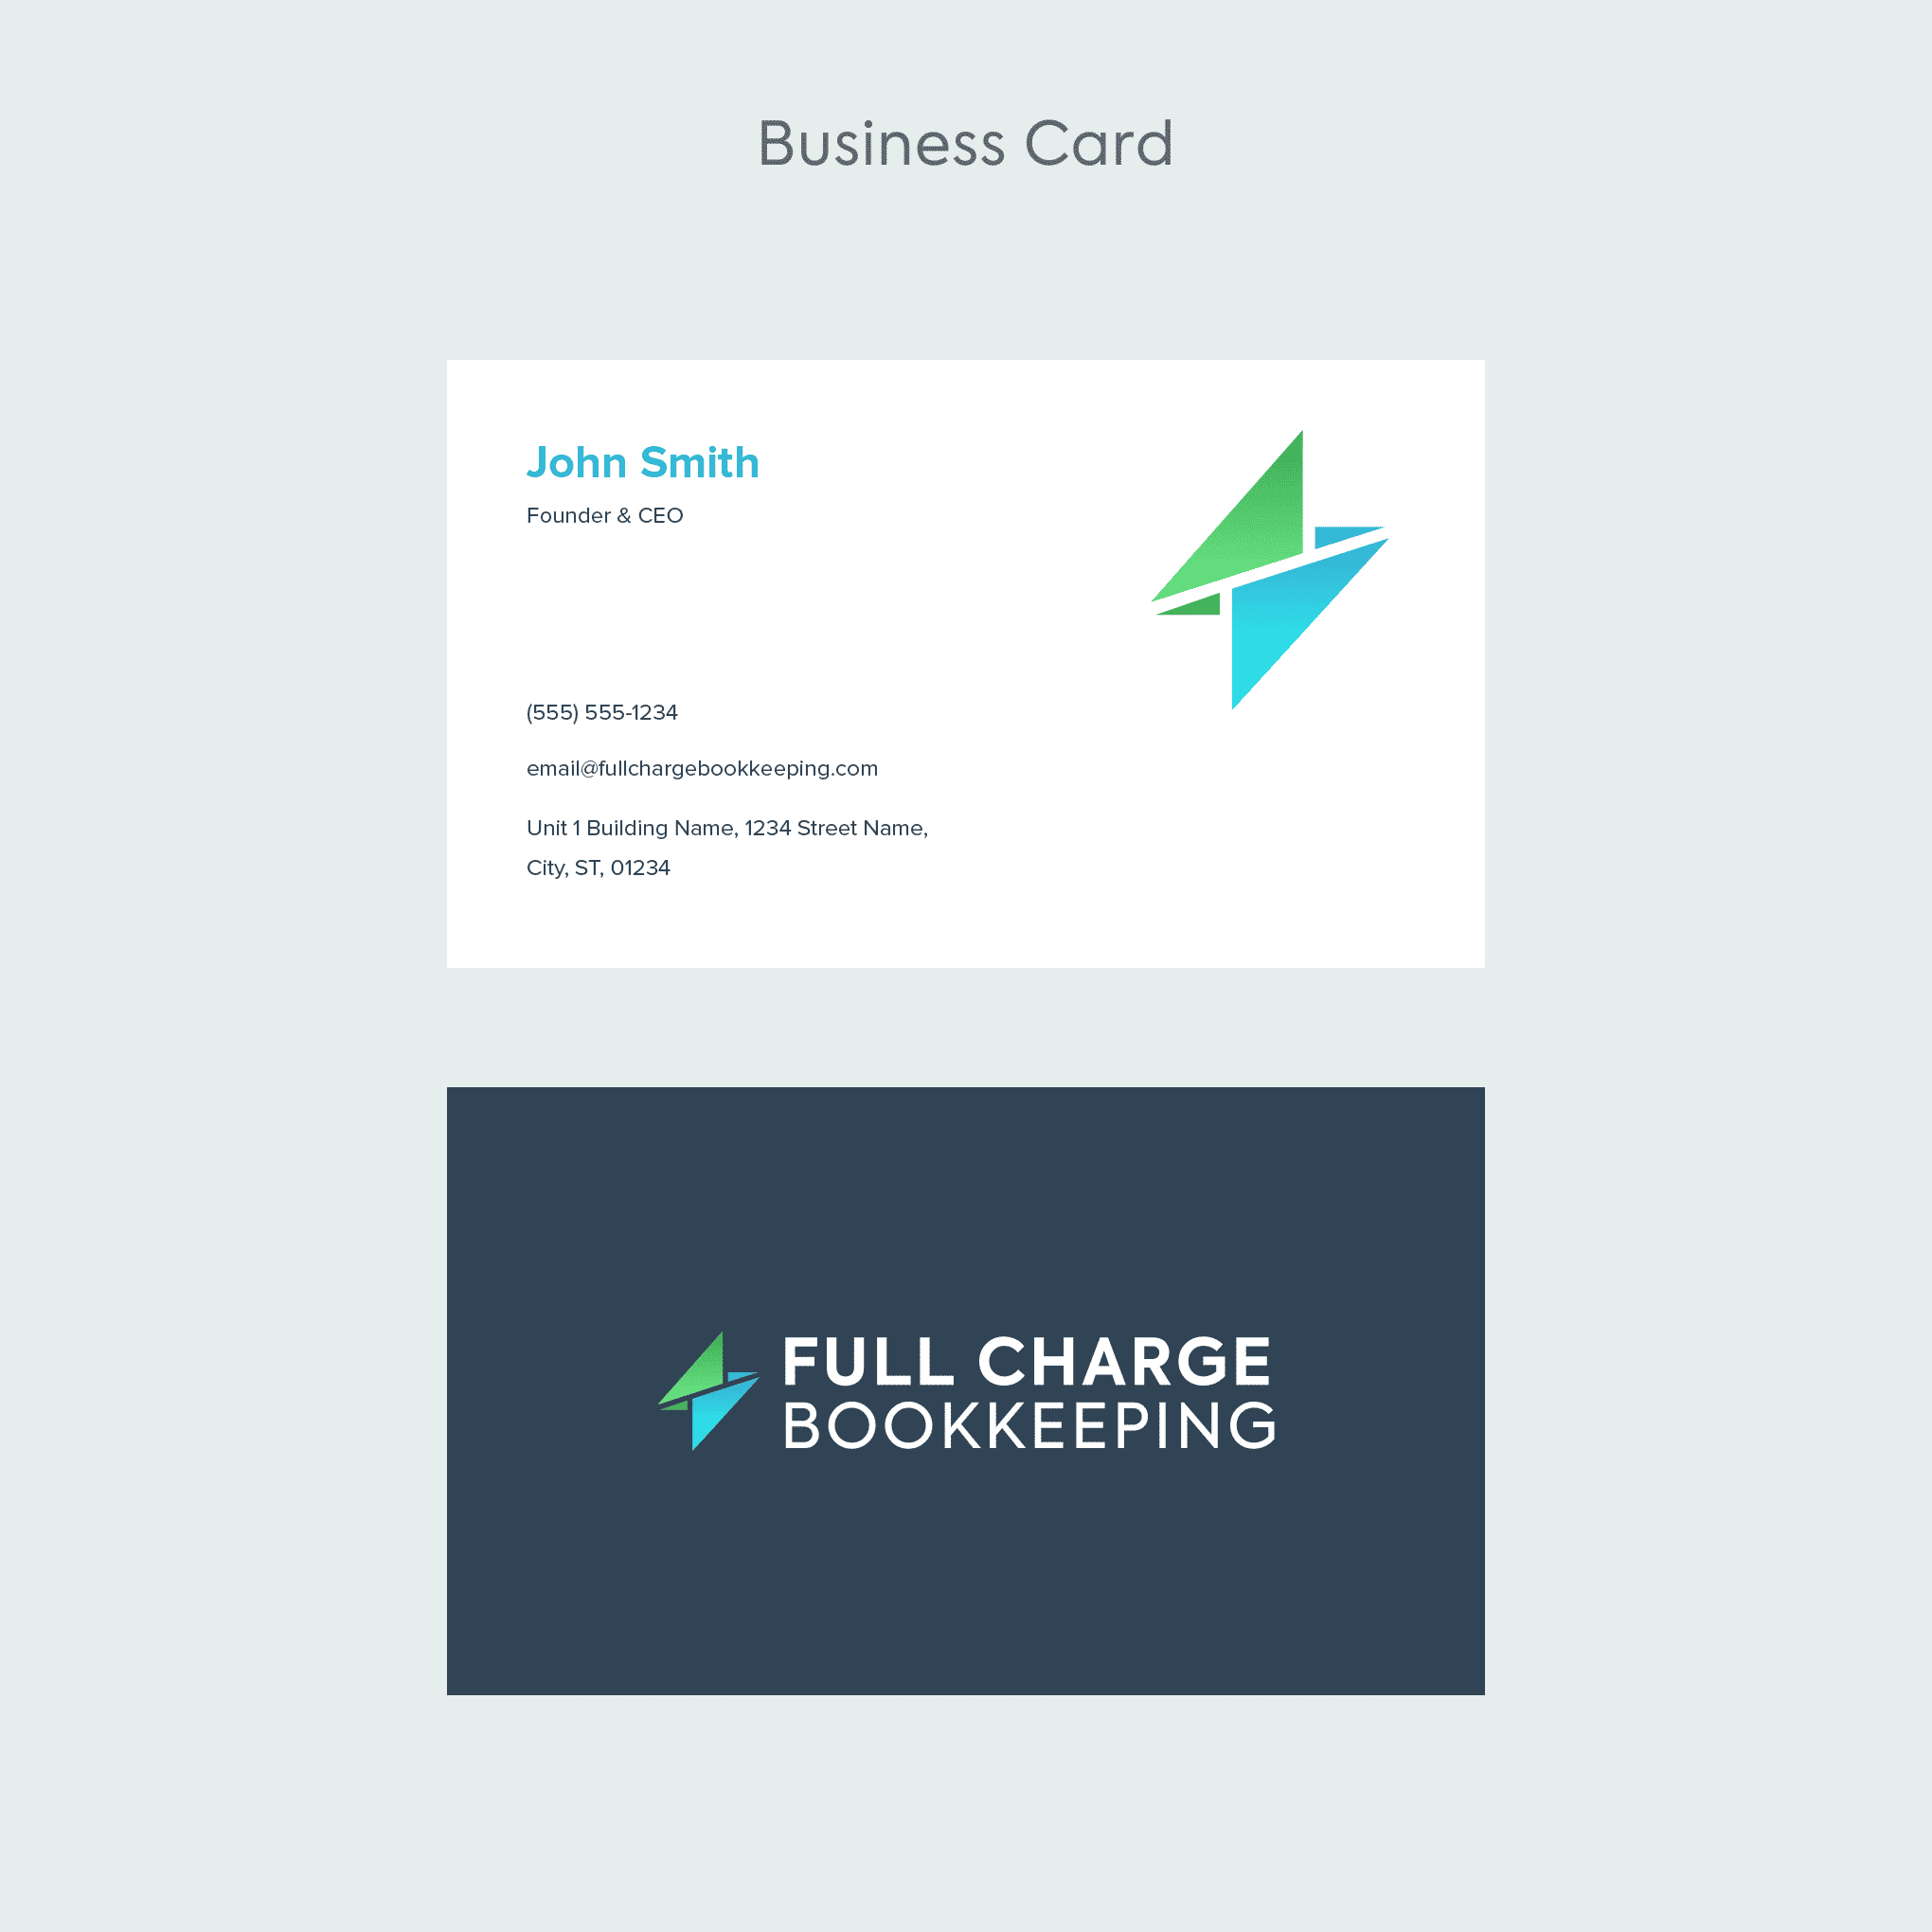 04 - Business Card Template (6)